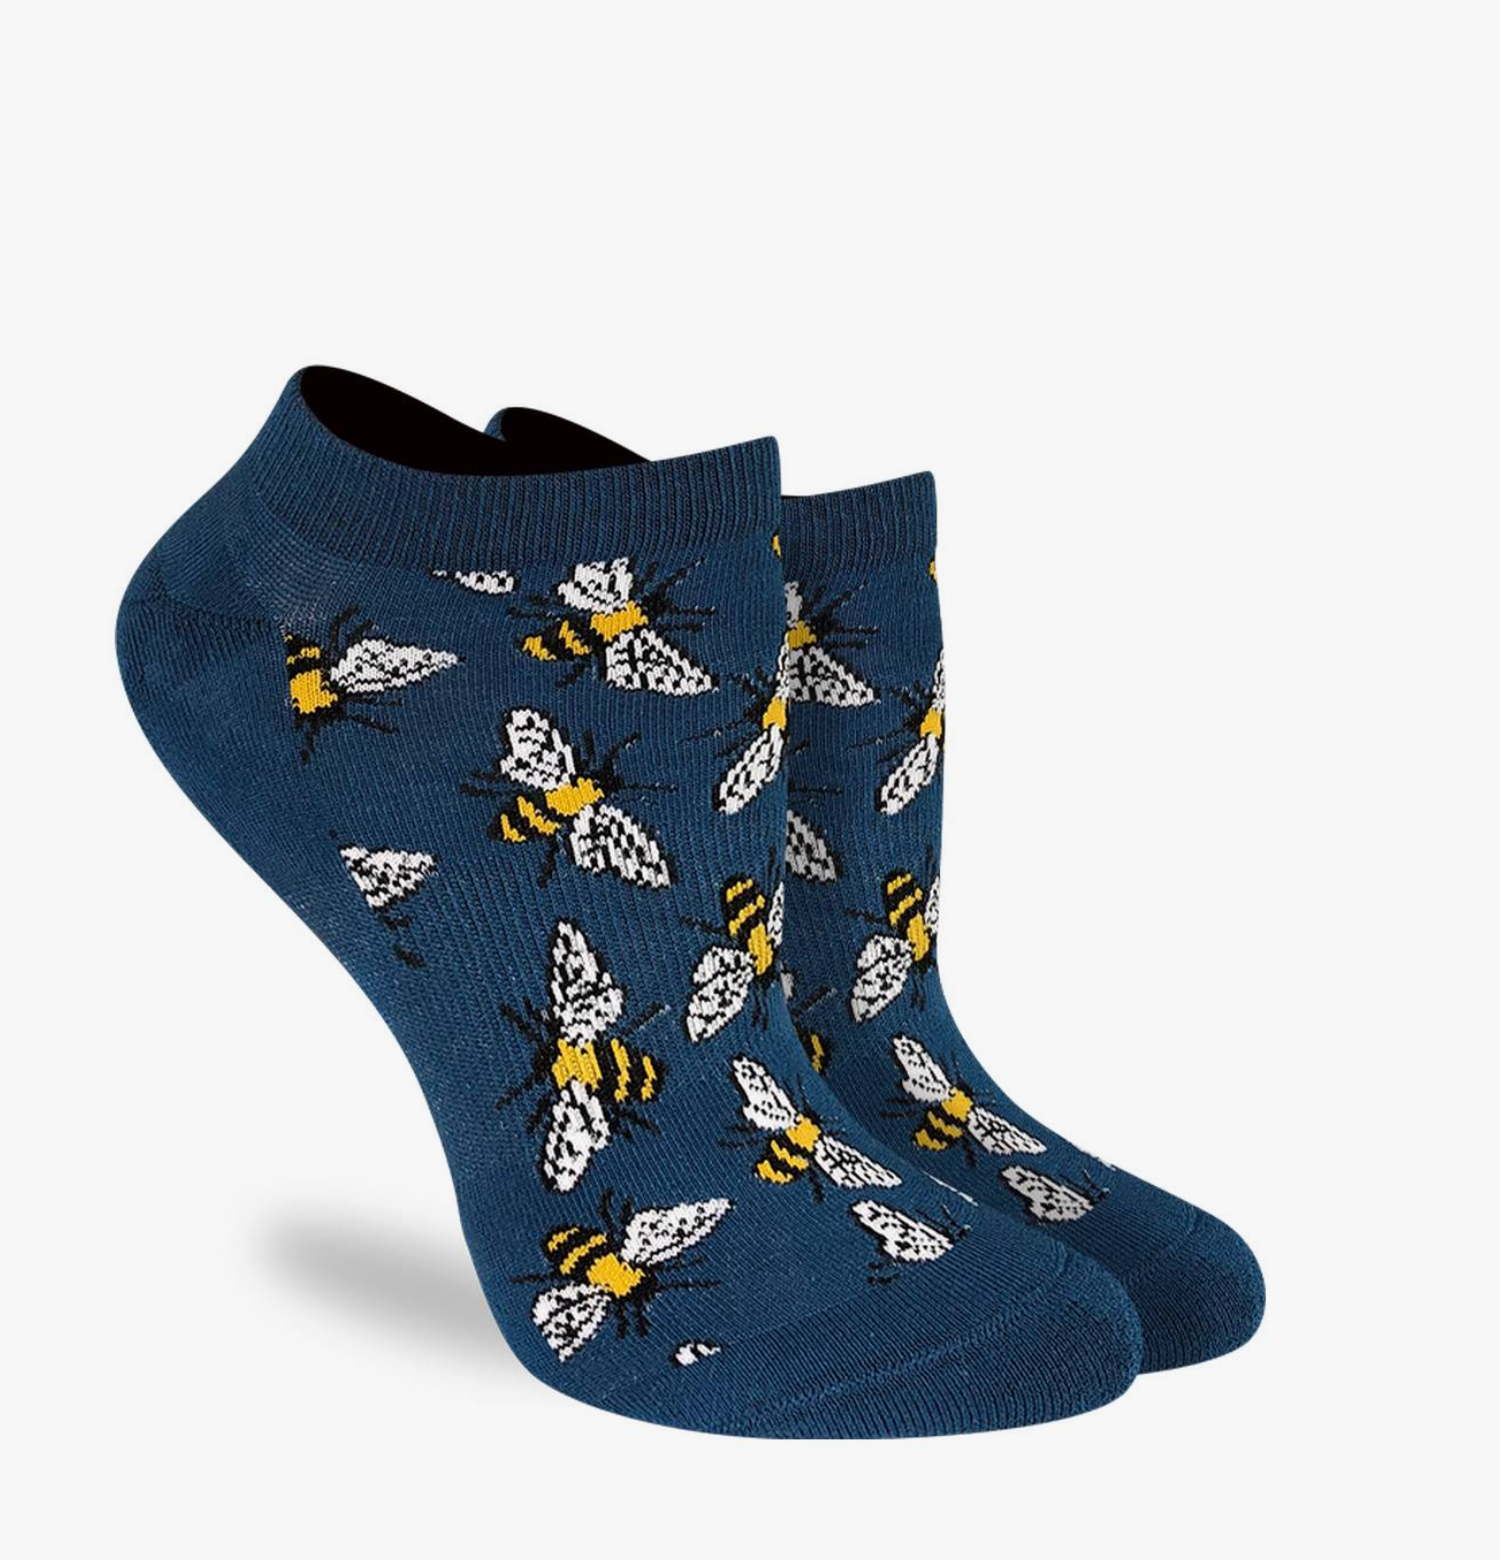 Sock - Small Ankle Sock: Bees